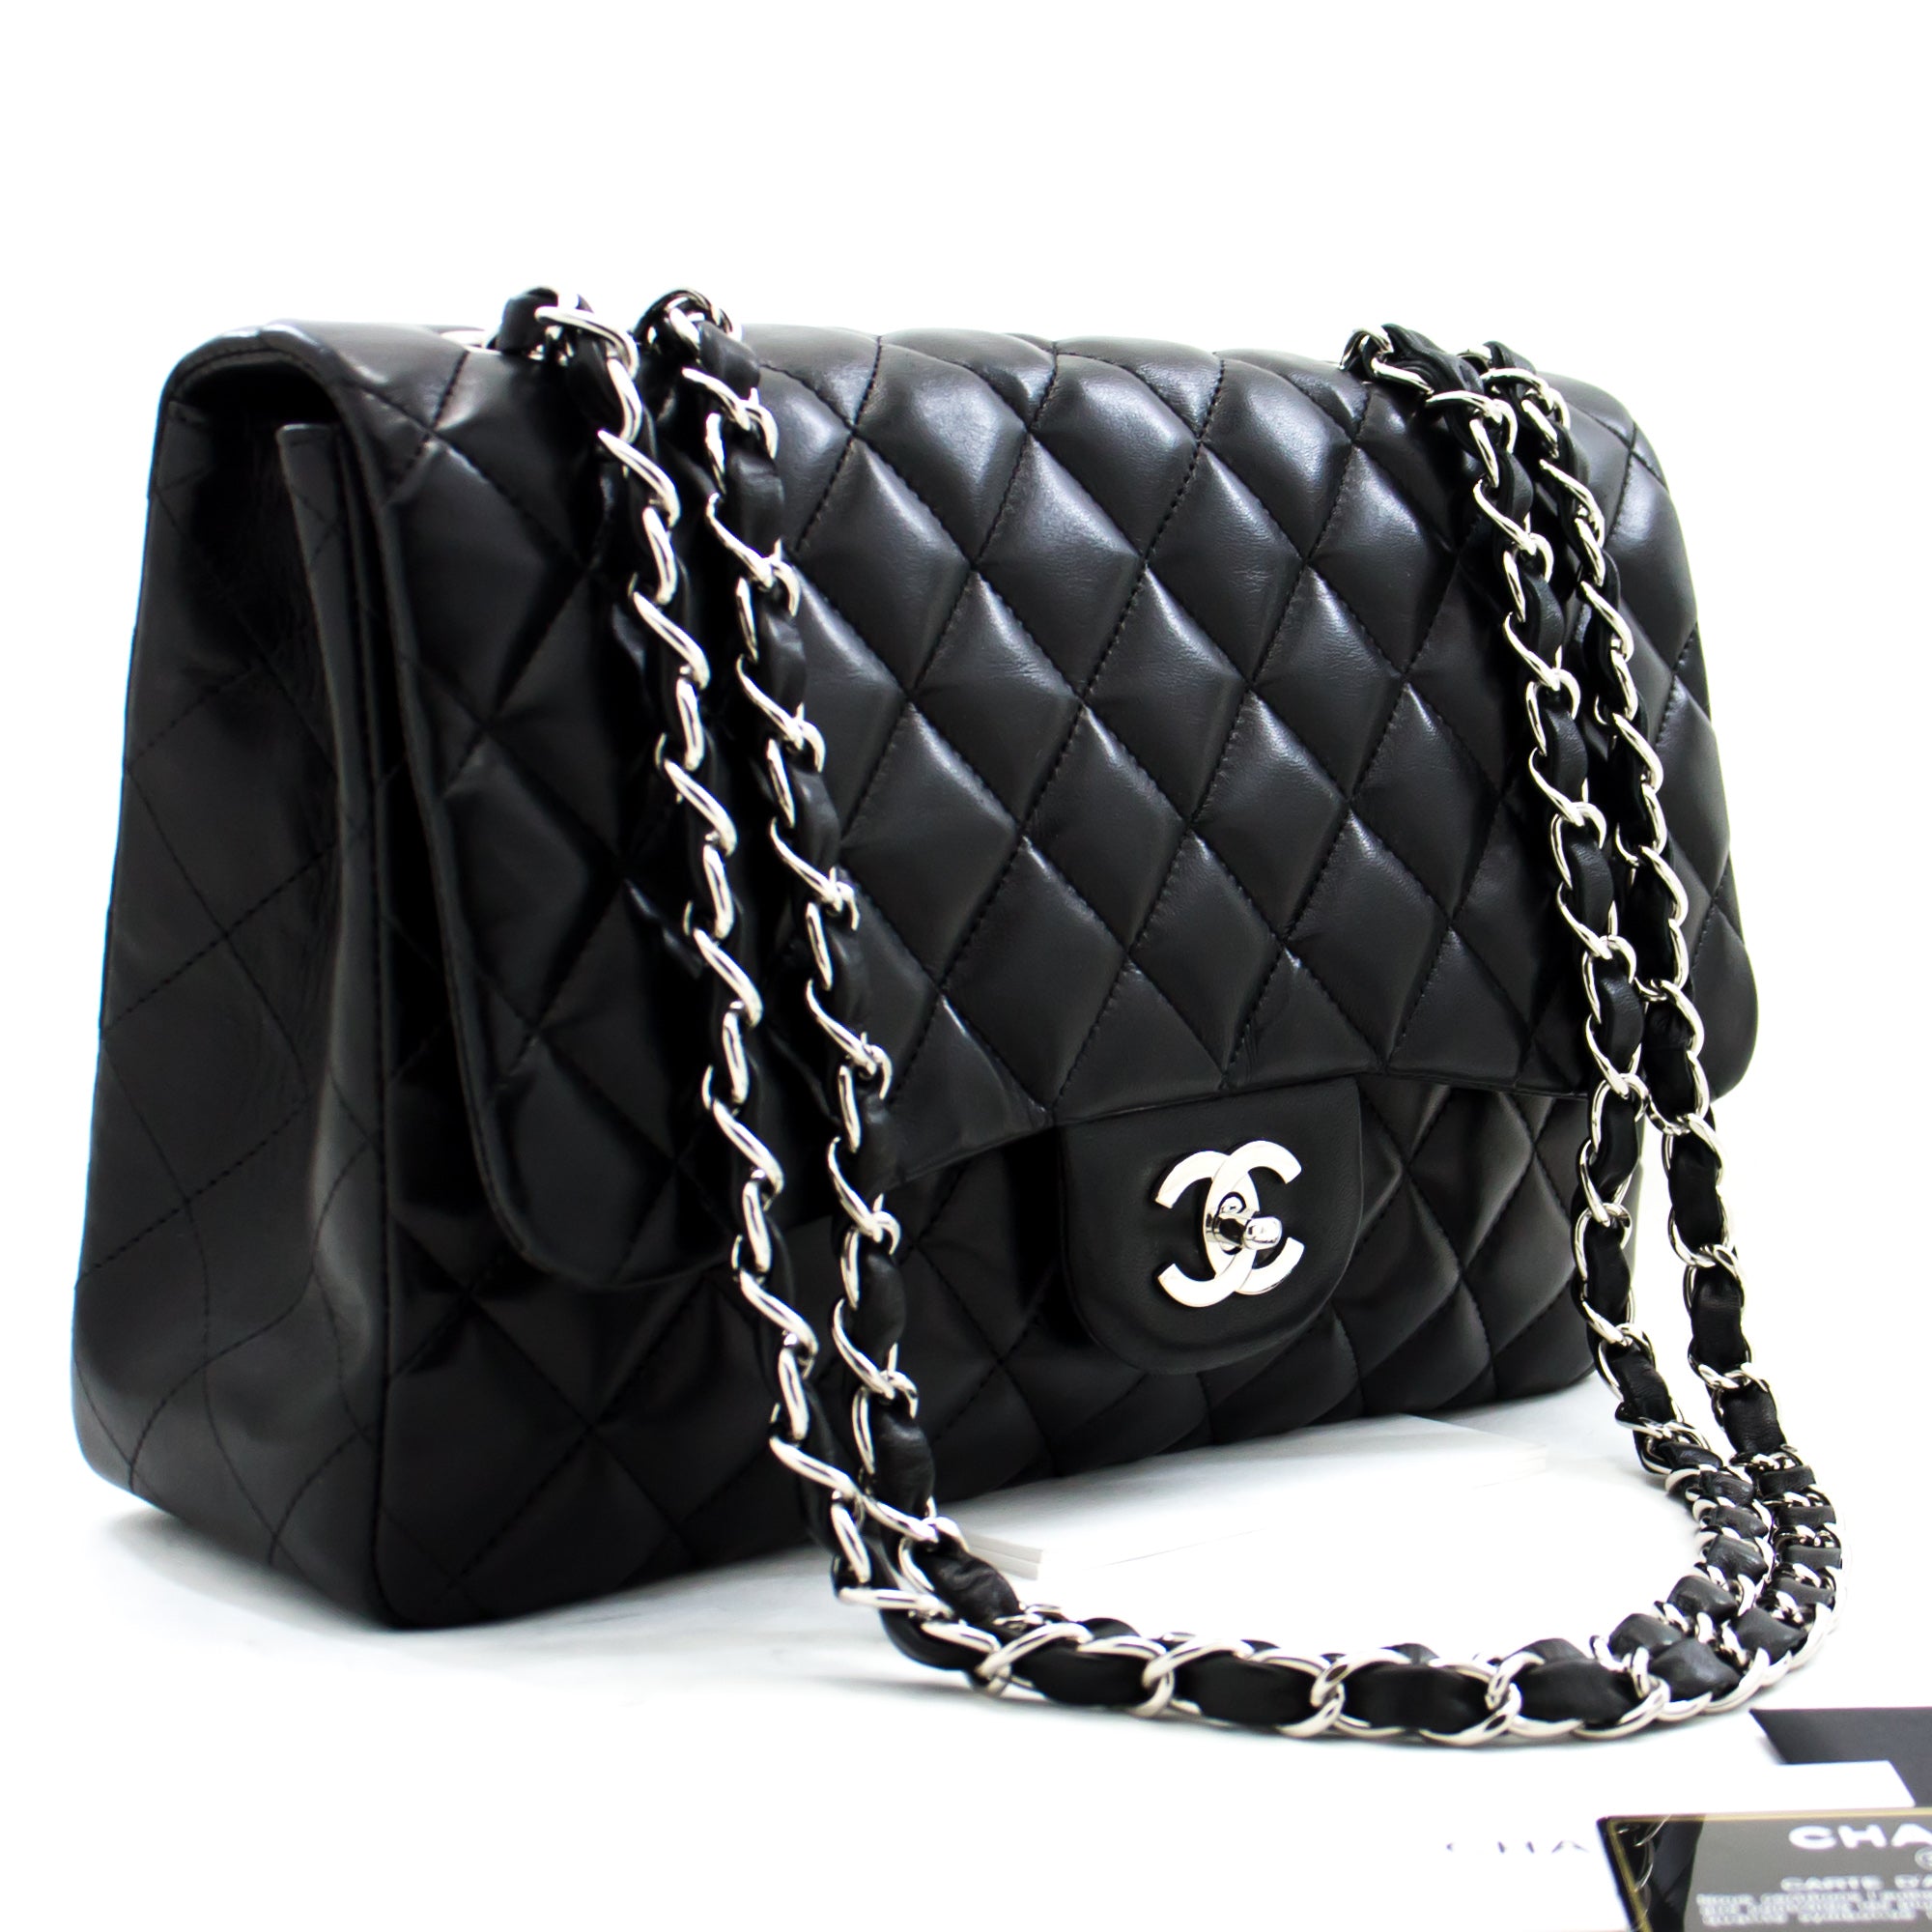 black chanel purse with chain